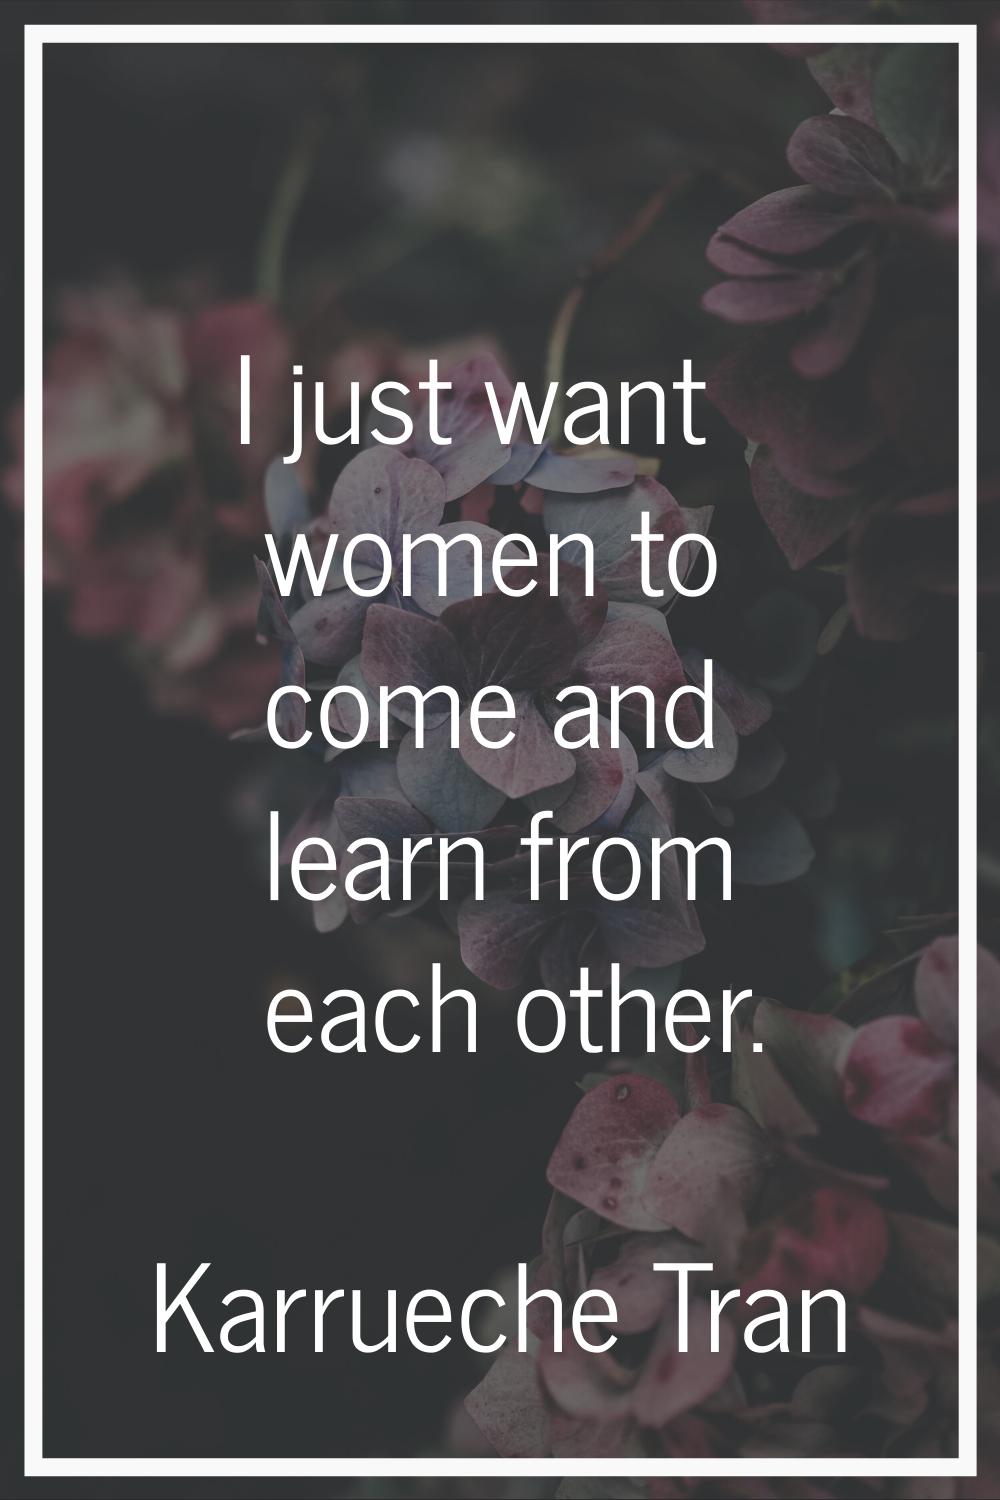 I just want women to come and learn from each other.